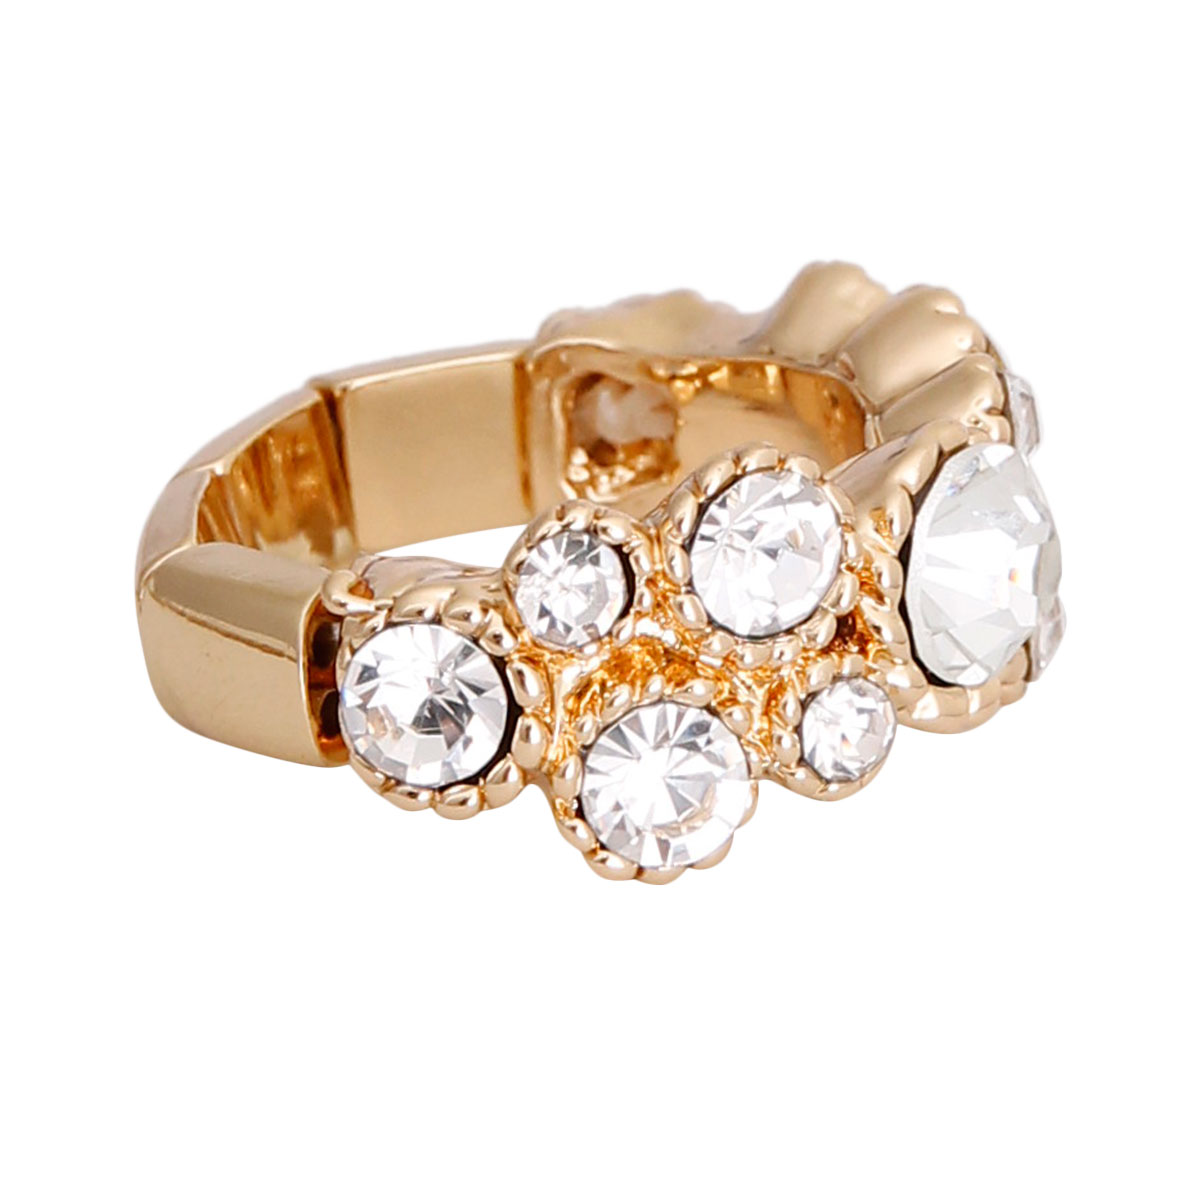 Gold Clustered Round Stone Ring